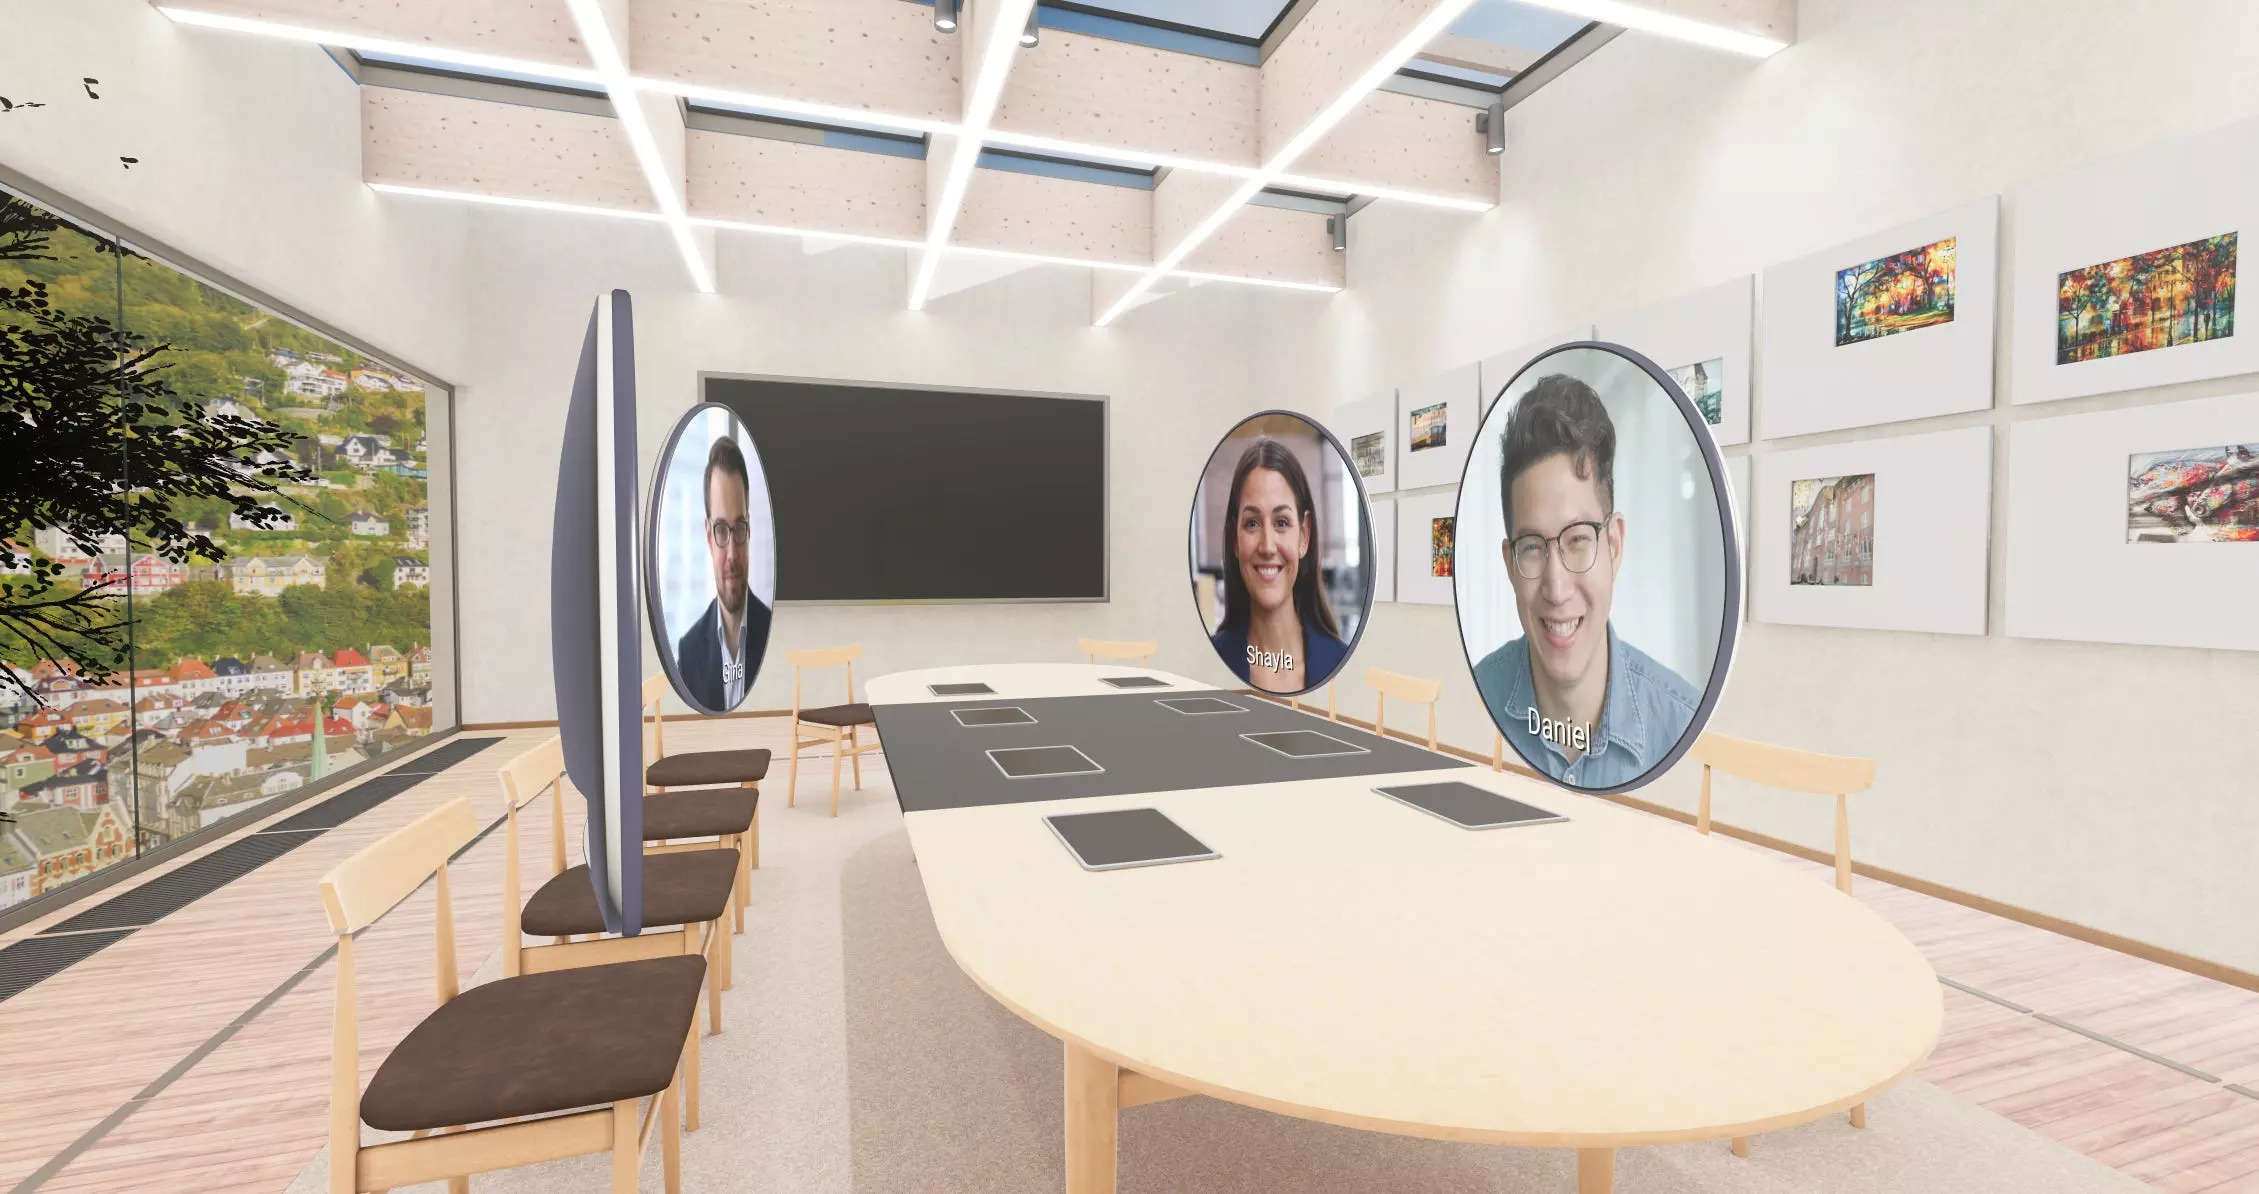 Video feeds of people seated around a virtual conference room